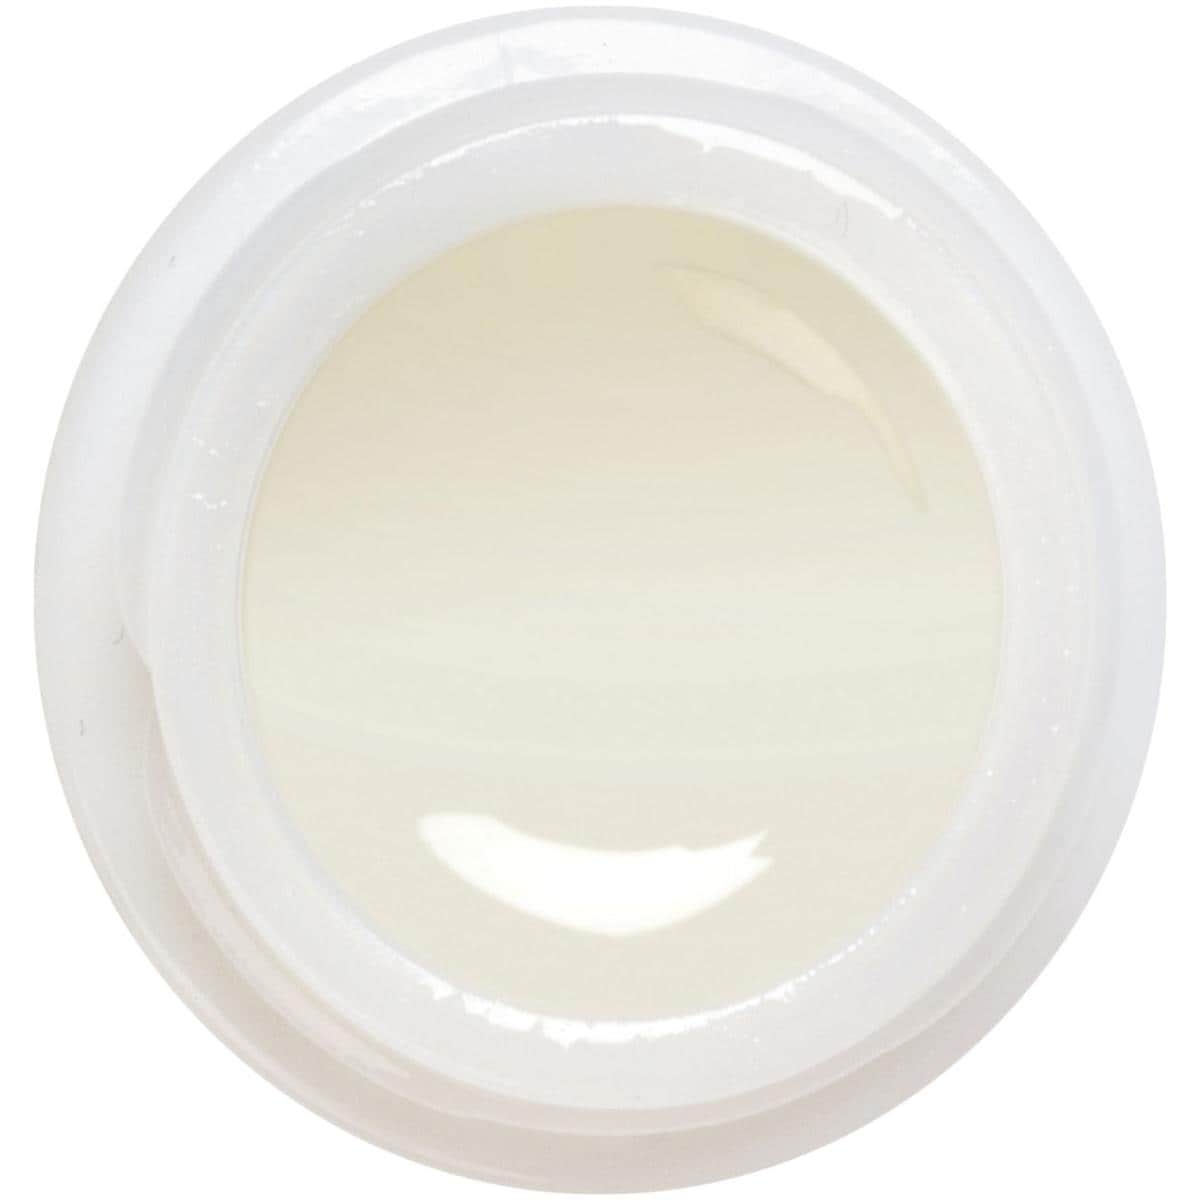 GC Initial IQ One Body Concept Lustre Pastes One NF Enamel Effect Shade - L-V Value, Packung 4 g